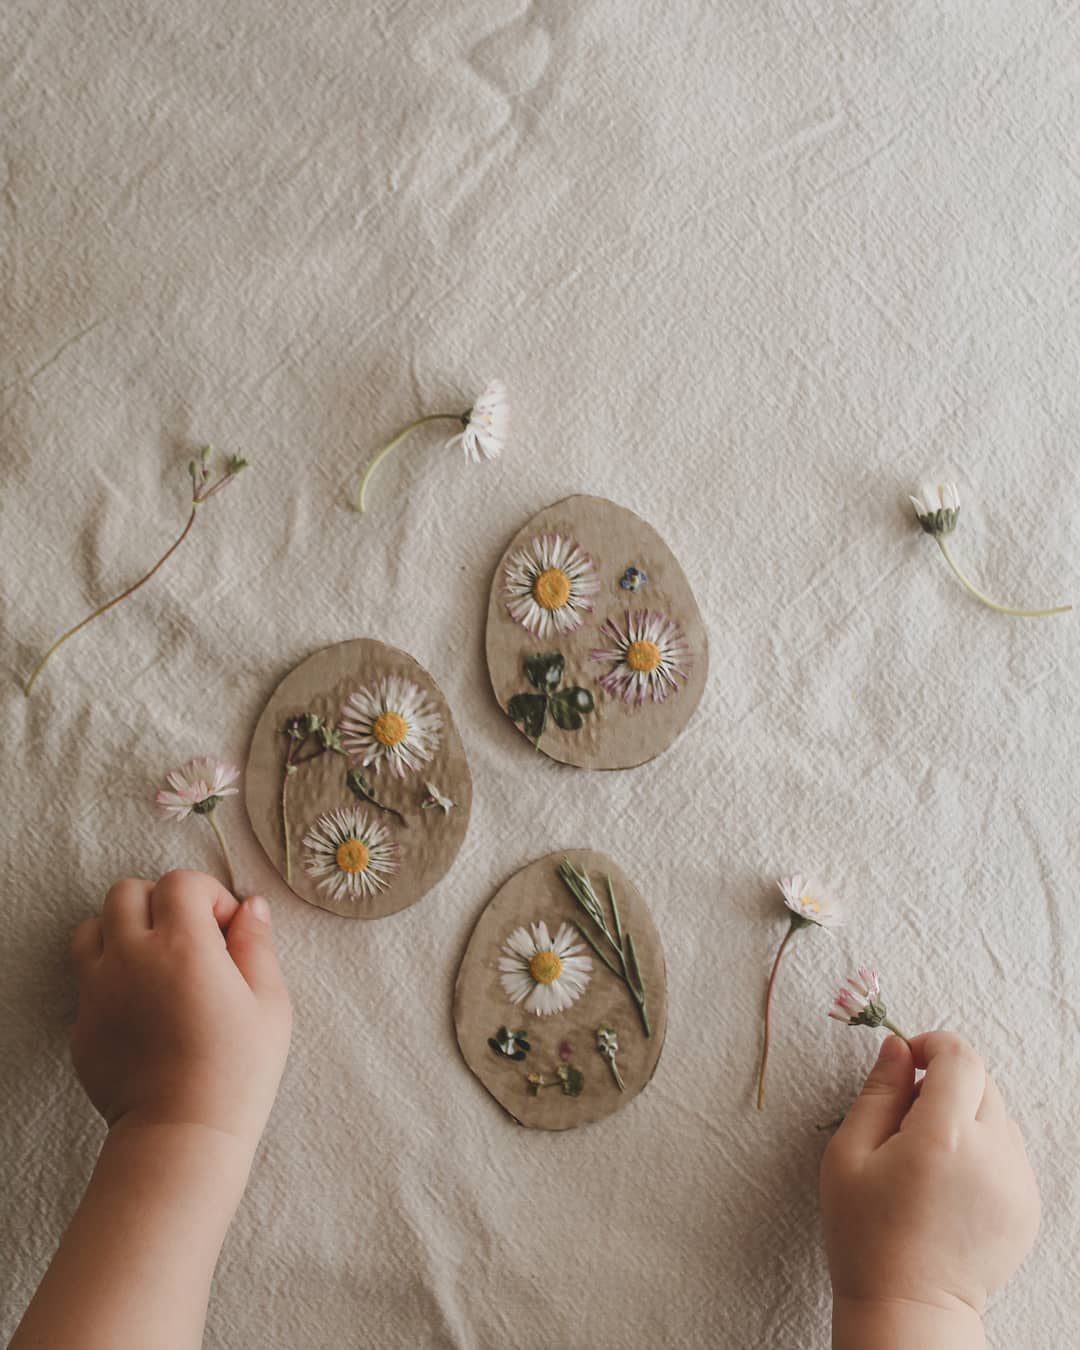 A child's hand pressing flowers into three circular clay moulds.